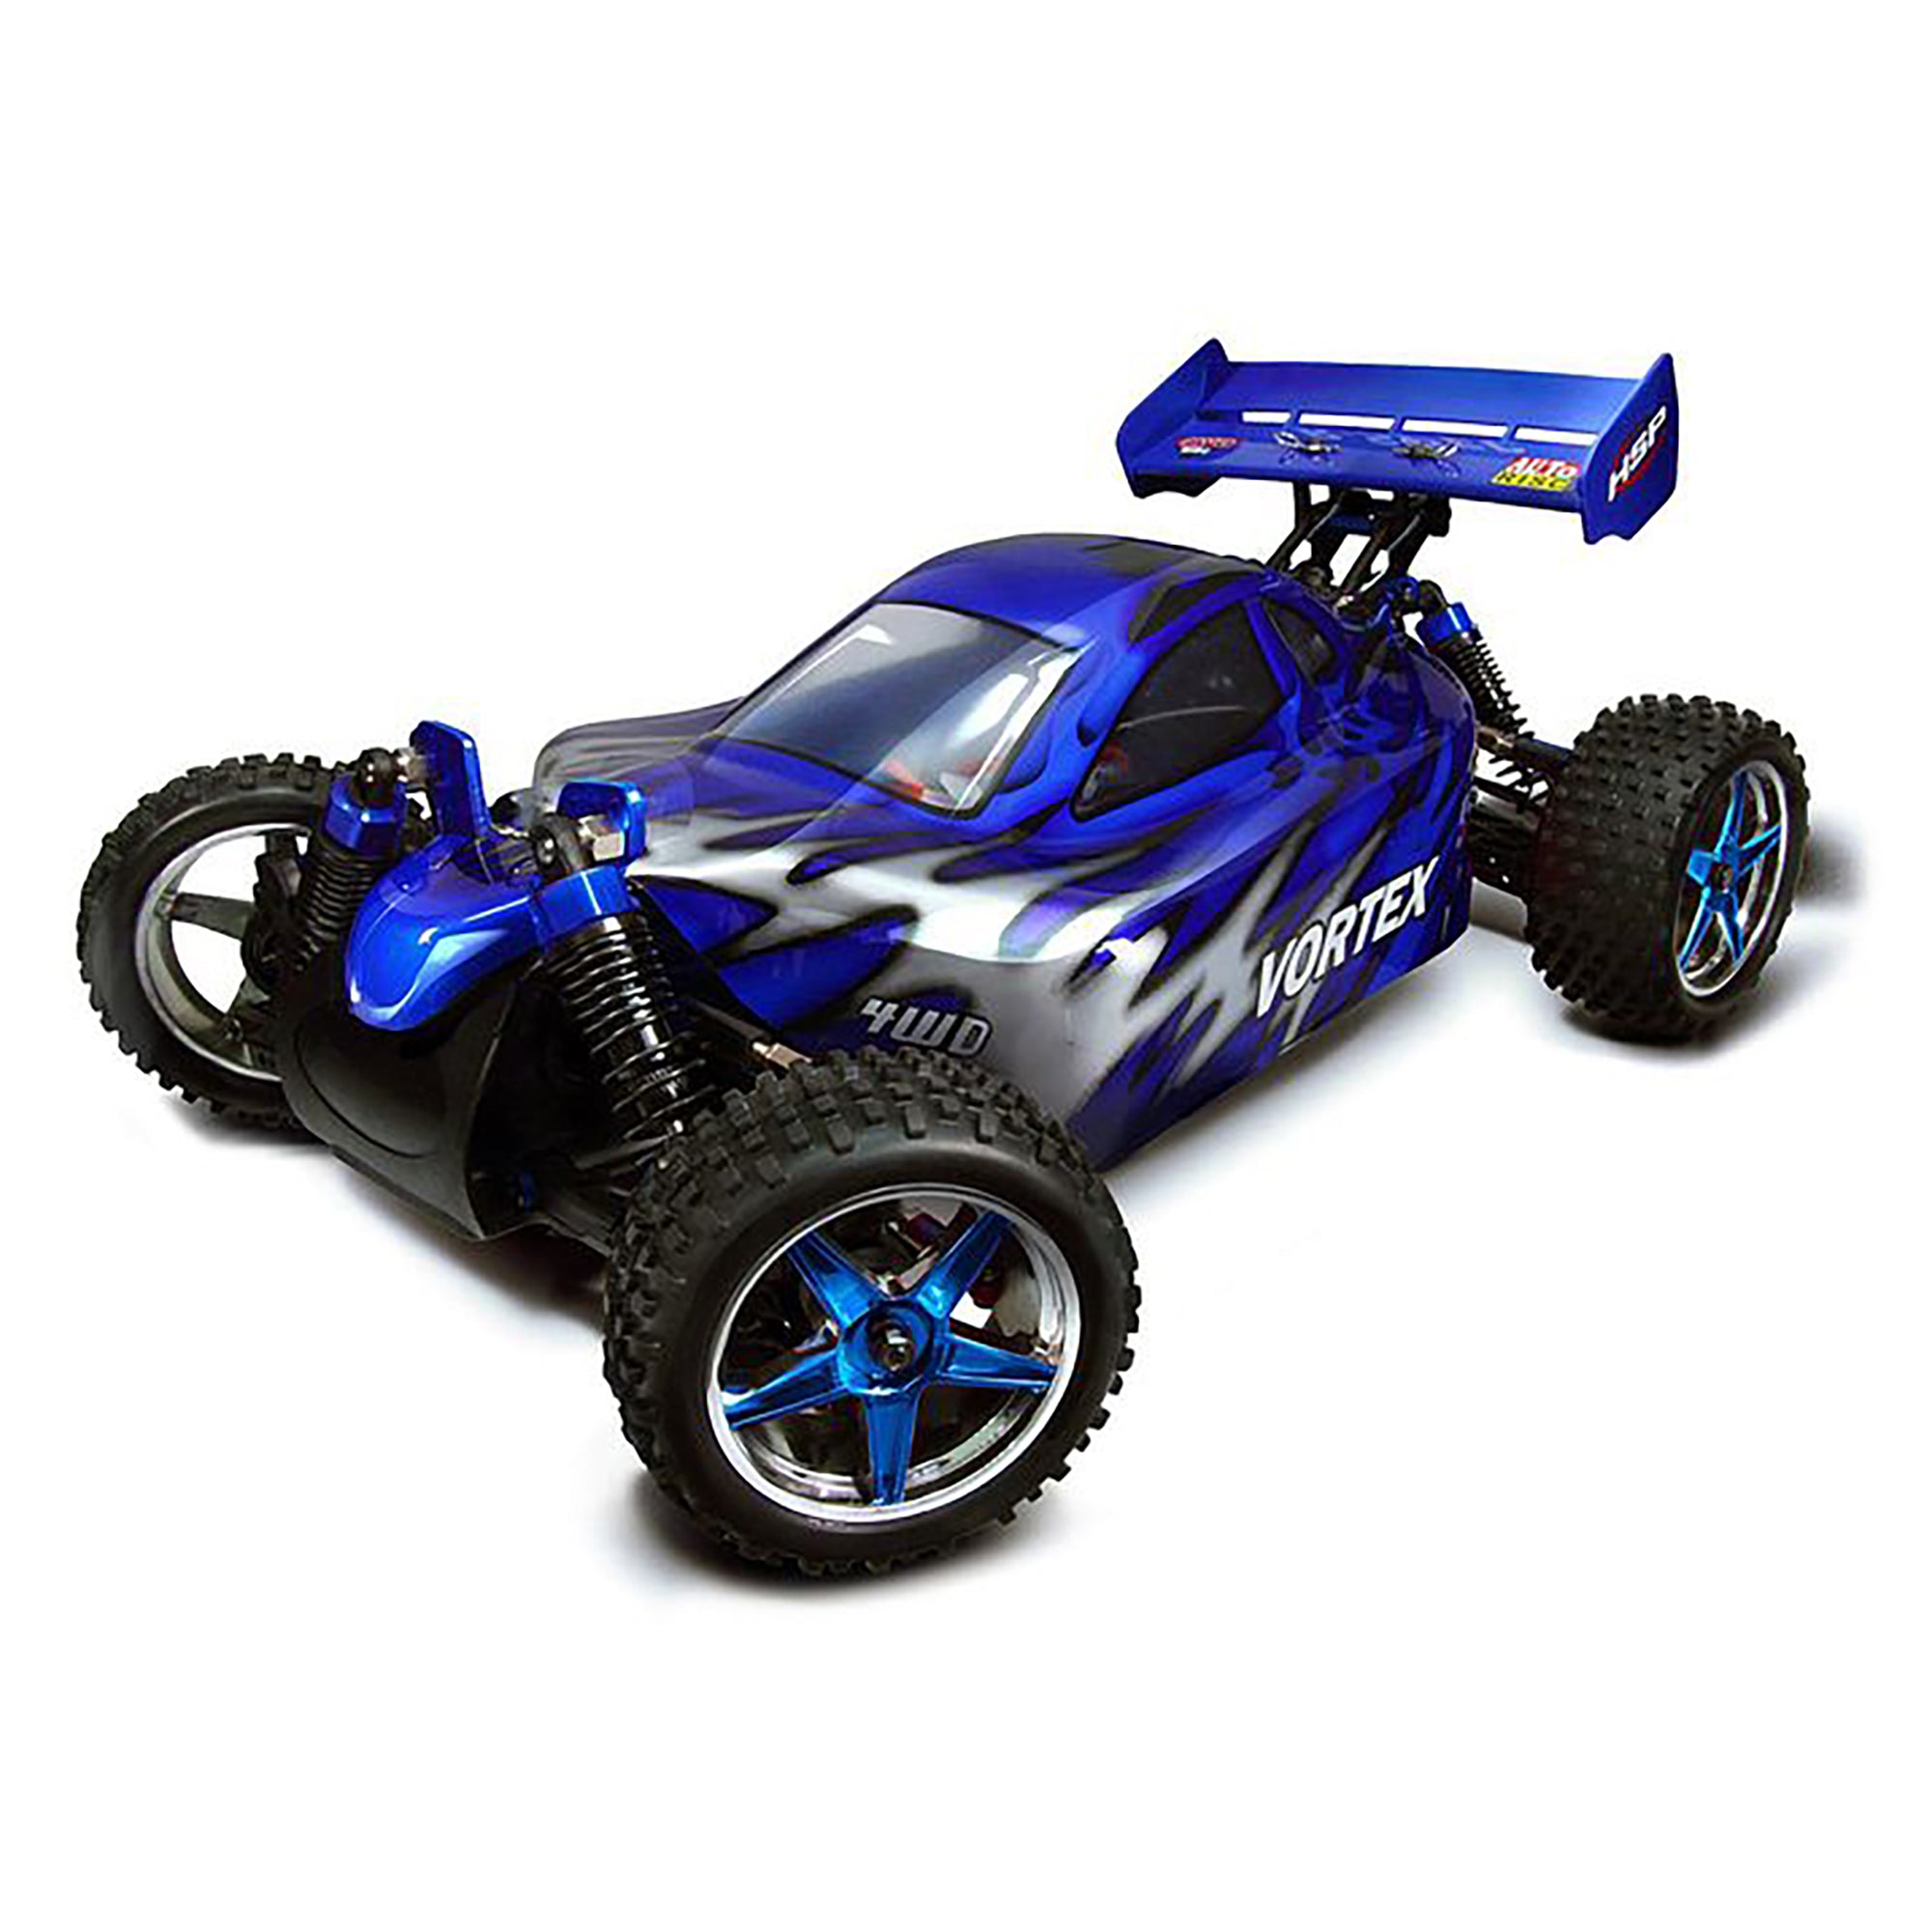 HSP Racing 94106-88805 Vortex 2.4GHz 2SP Nitro 4WD Off Road 1/10 Scale RC Buggy